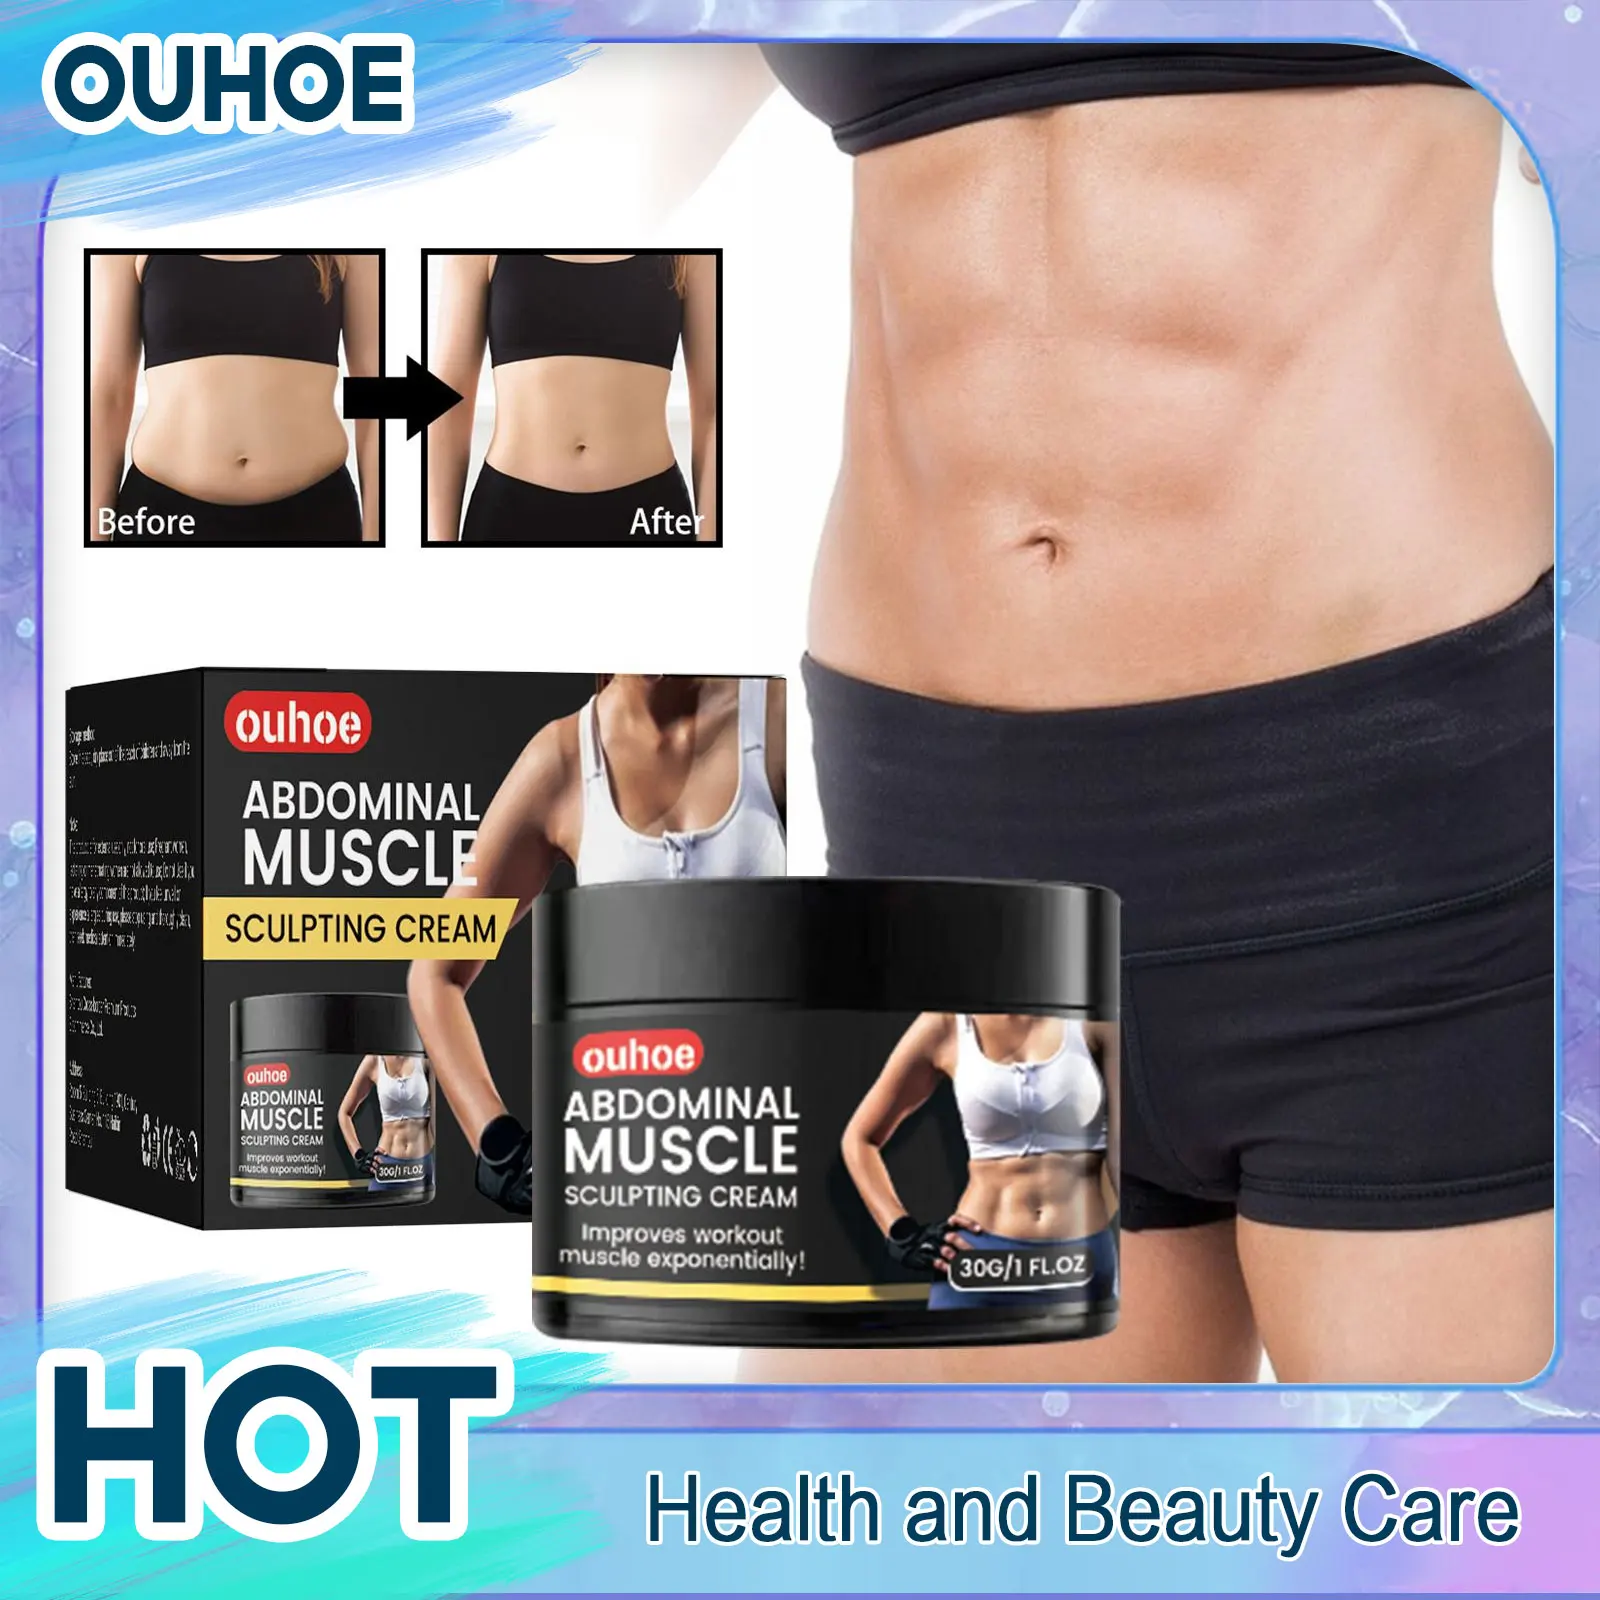 Belly Fat Burner Cream Weight Loss Firming Shaping Waist Lines Fitness Abdominal Muscle Flat Tummy Anti Cellulite Slimming Cream